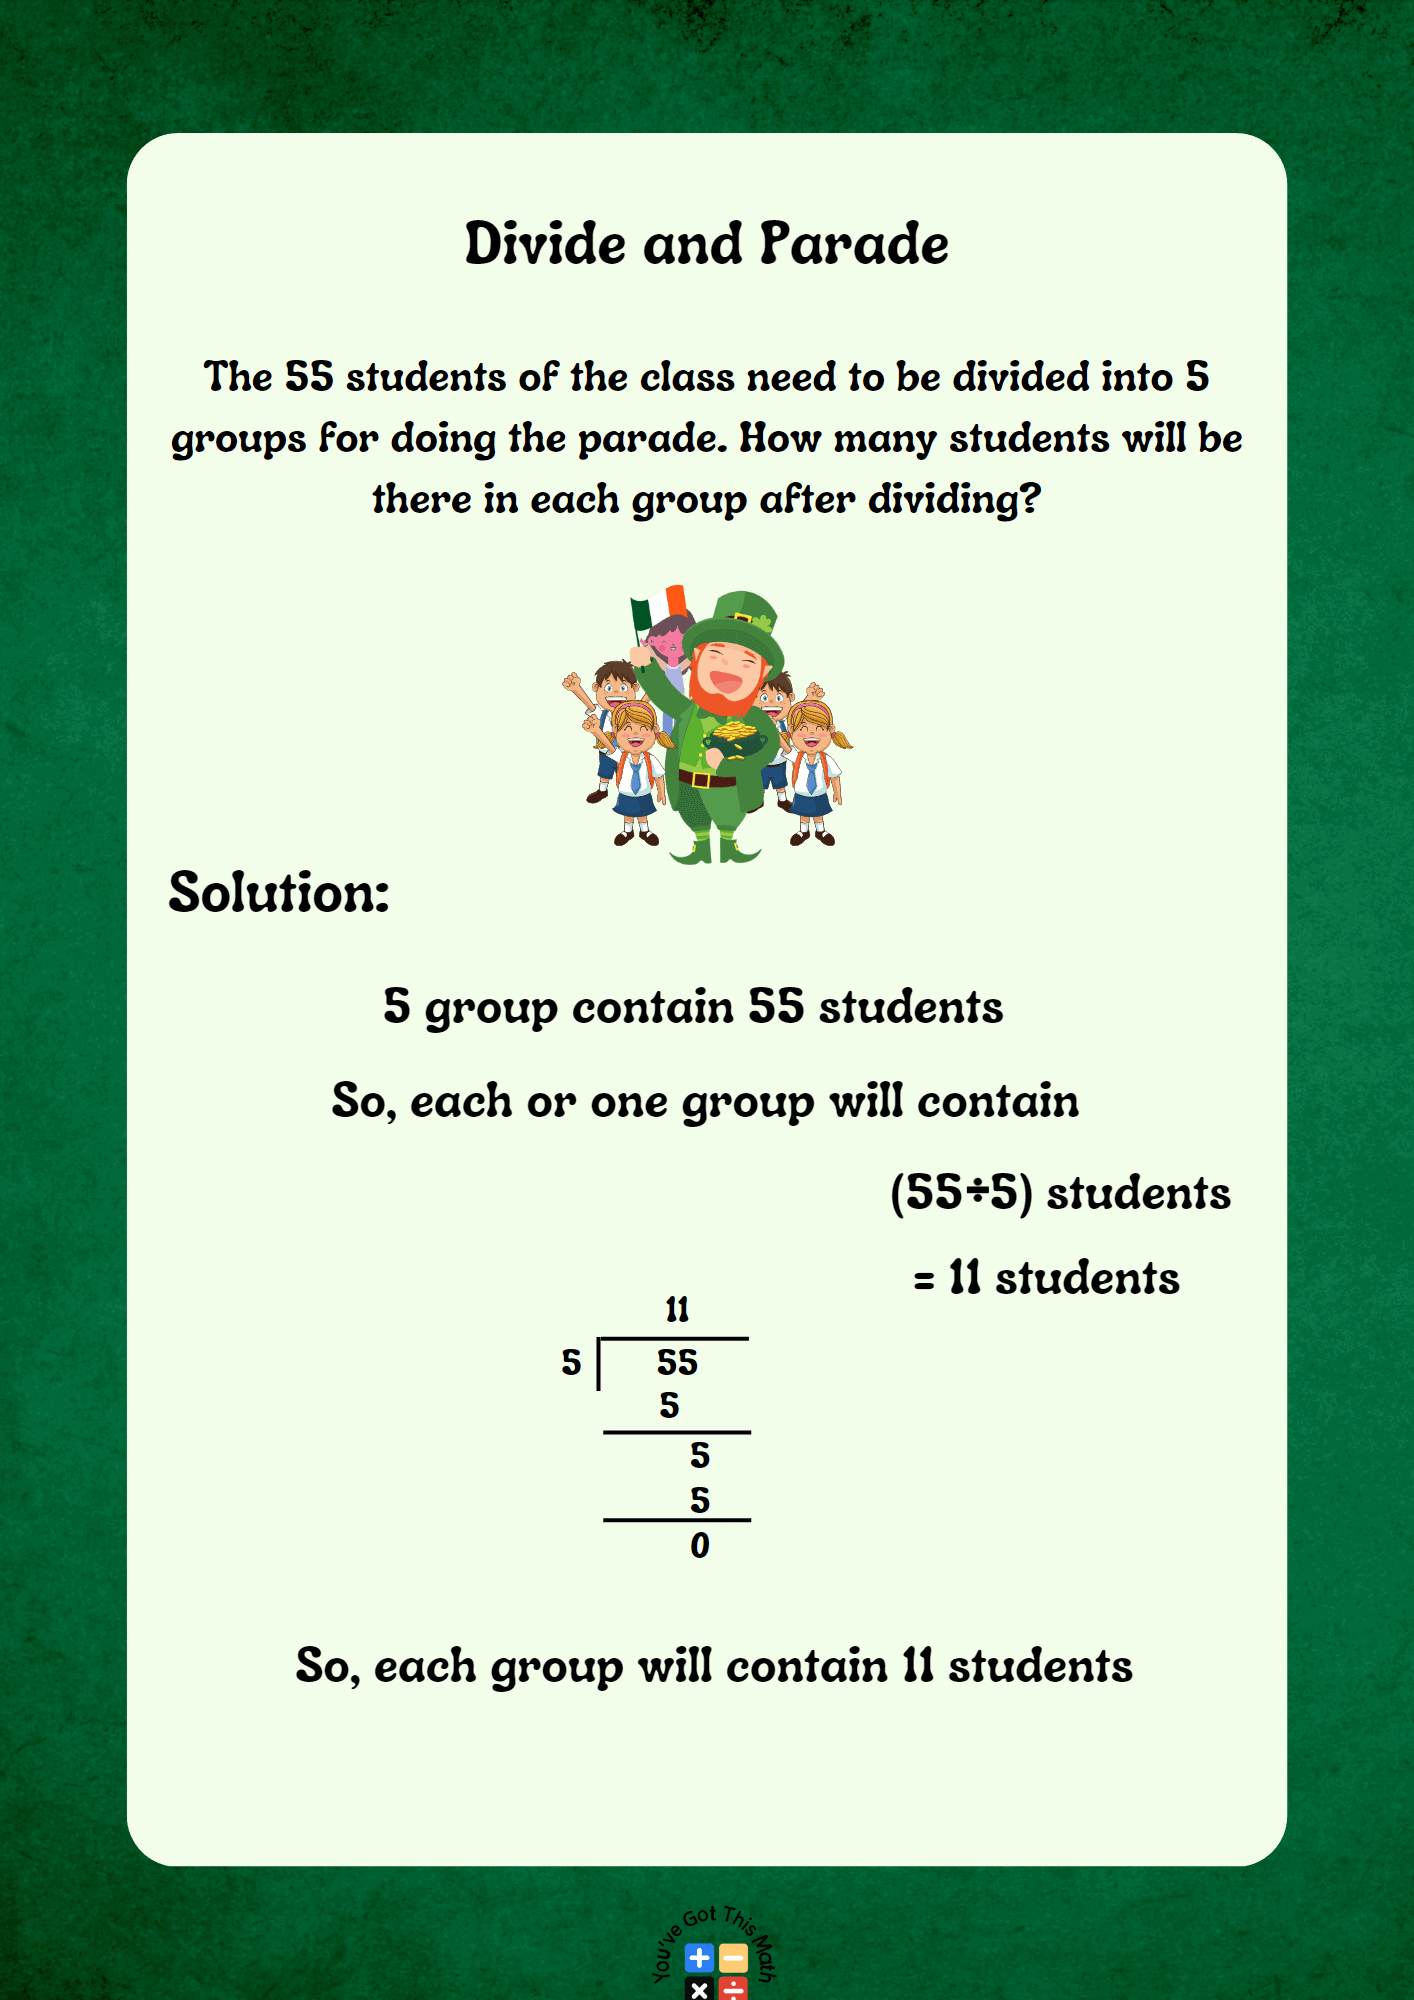 Taking Help of Division Procedure to Complete St Patrick's Day Word Problems